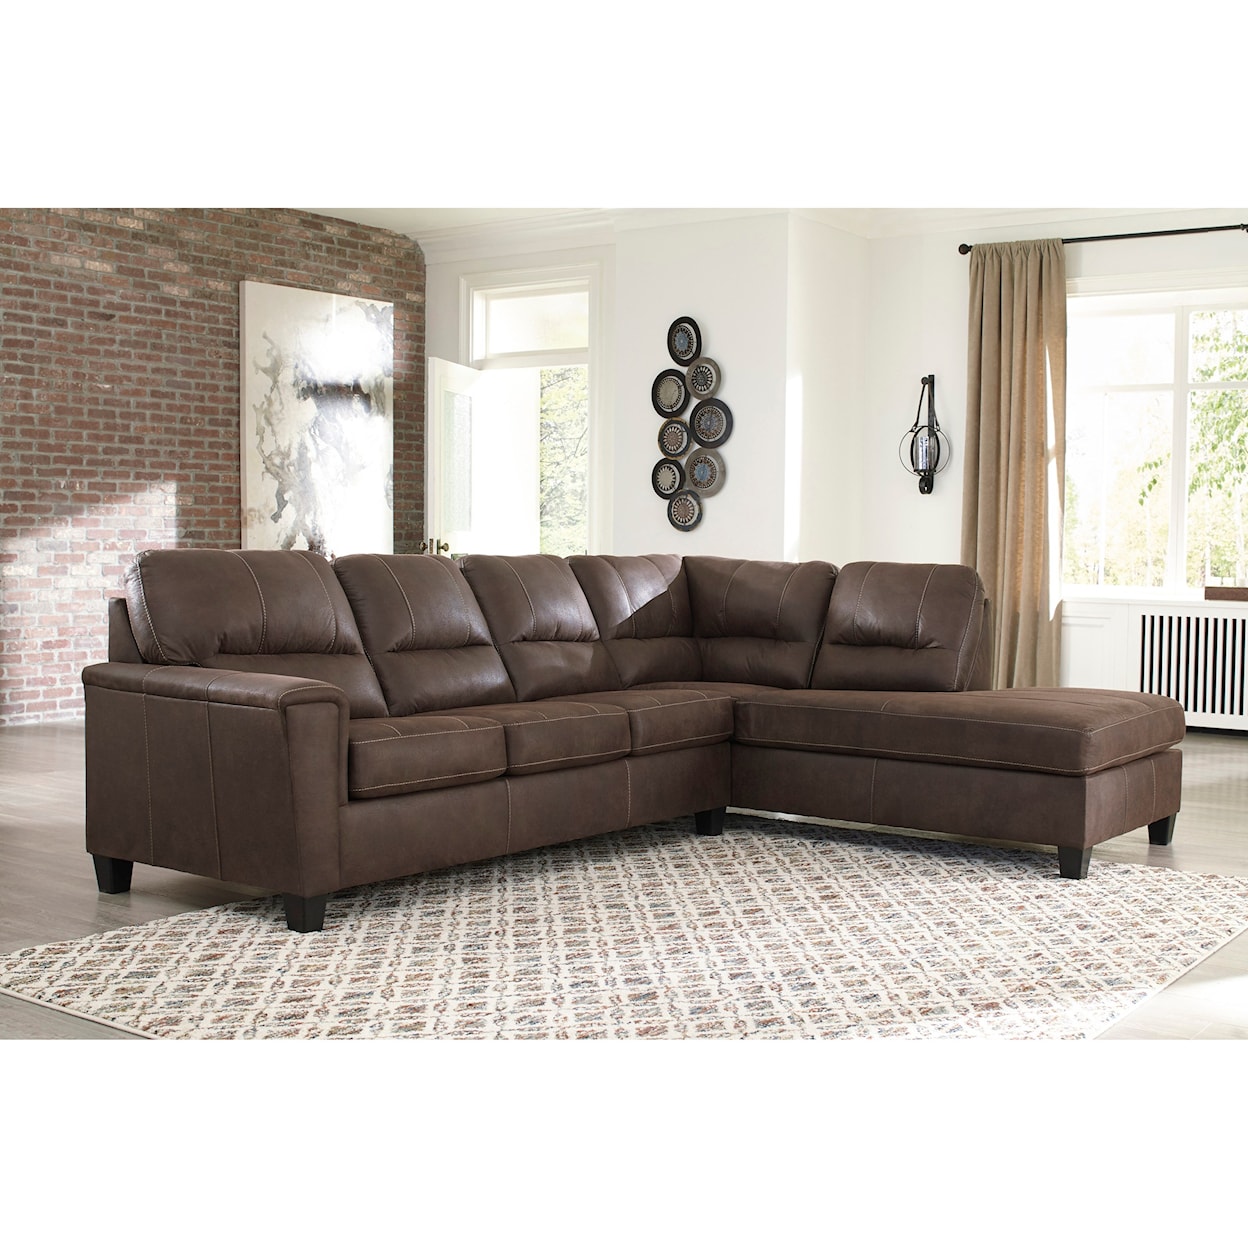 Ashley Furniture Signature Design Navi 2-Piece Sectional w/ Right Chaise & Sleeper